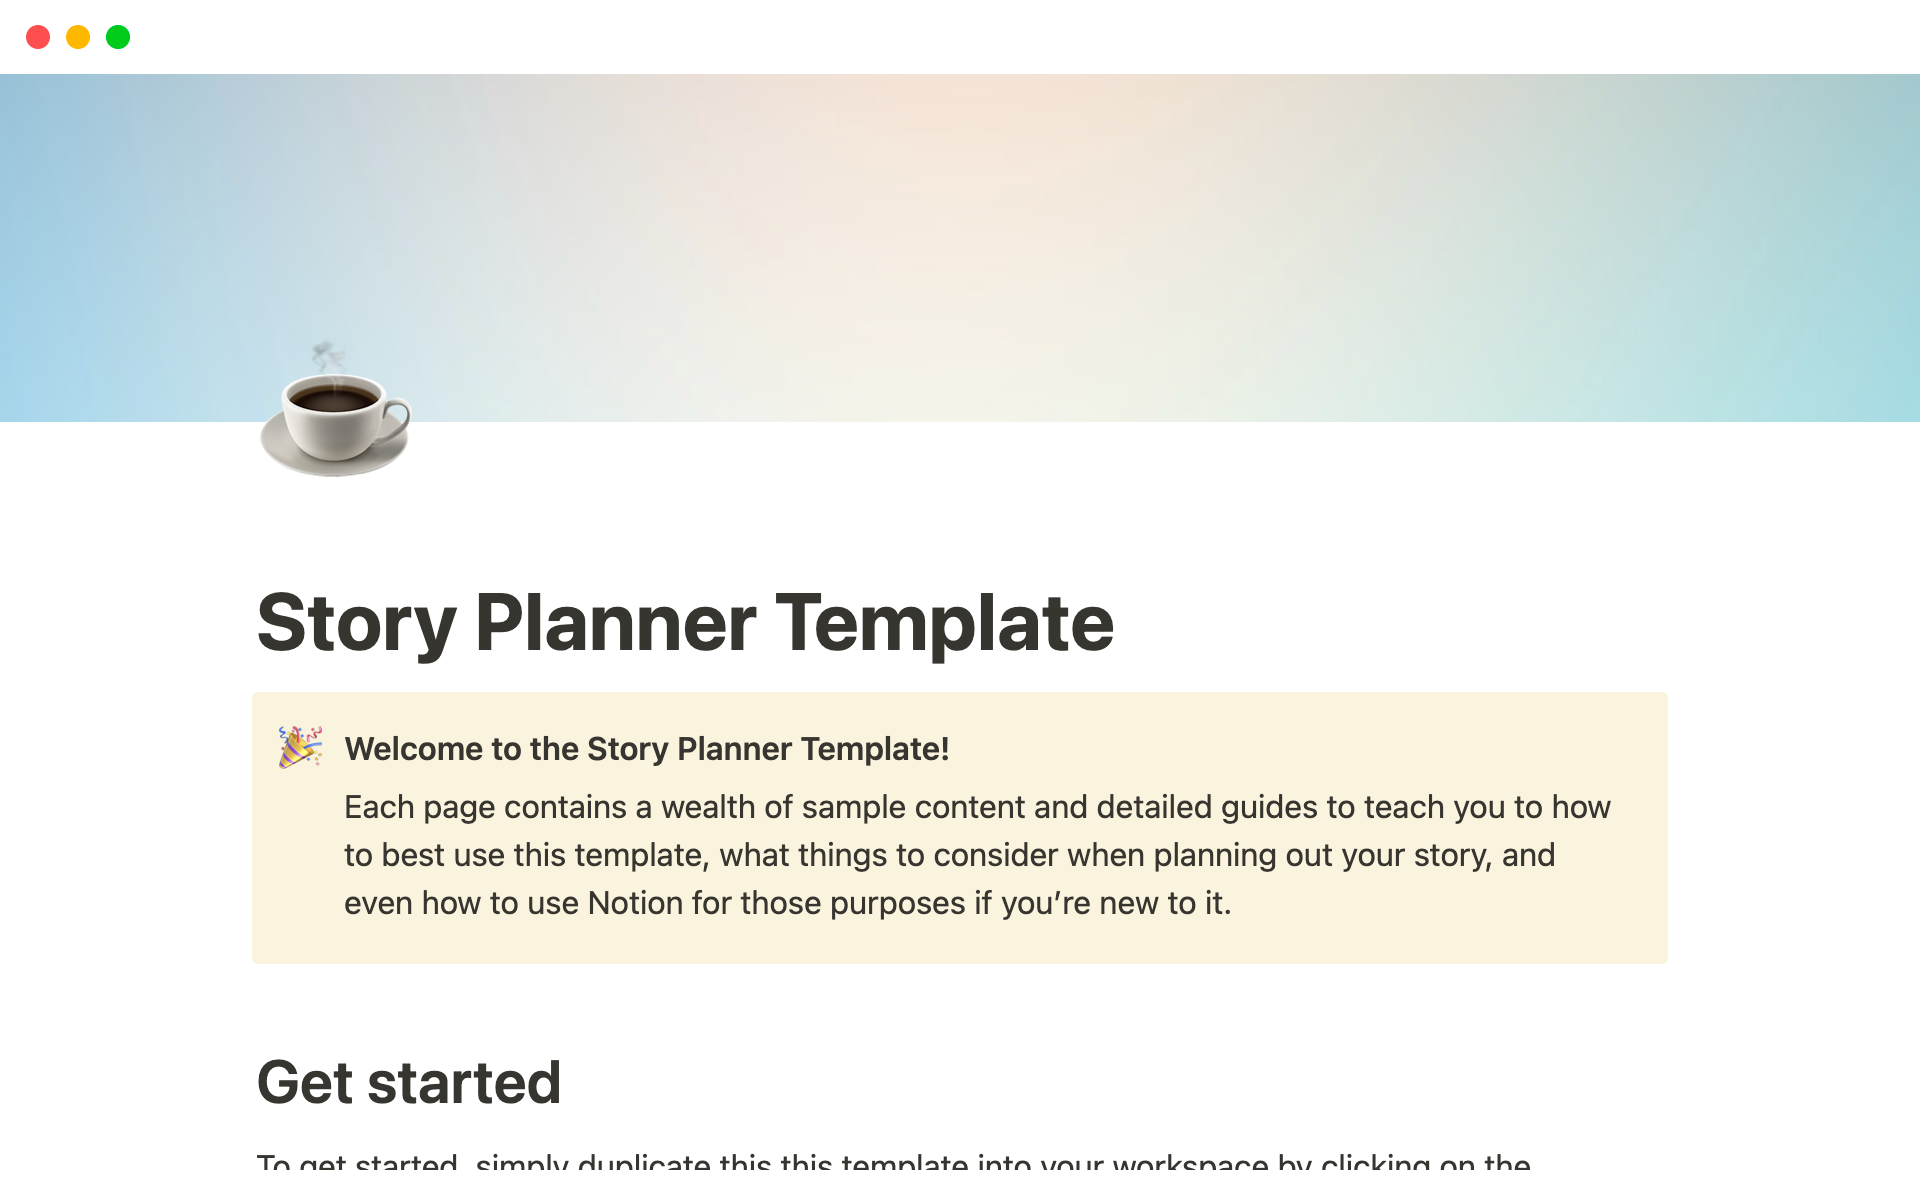 A template preview for Ultimate Story Planner Workspace for Comics, Webtoons, and Manga